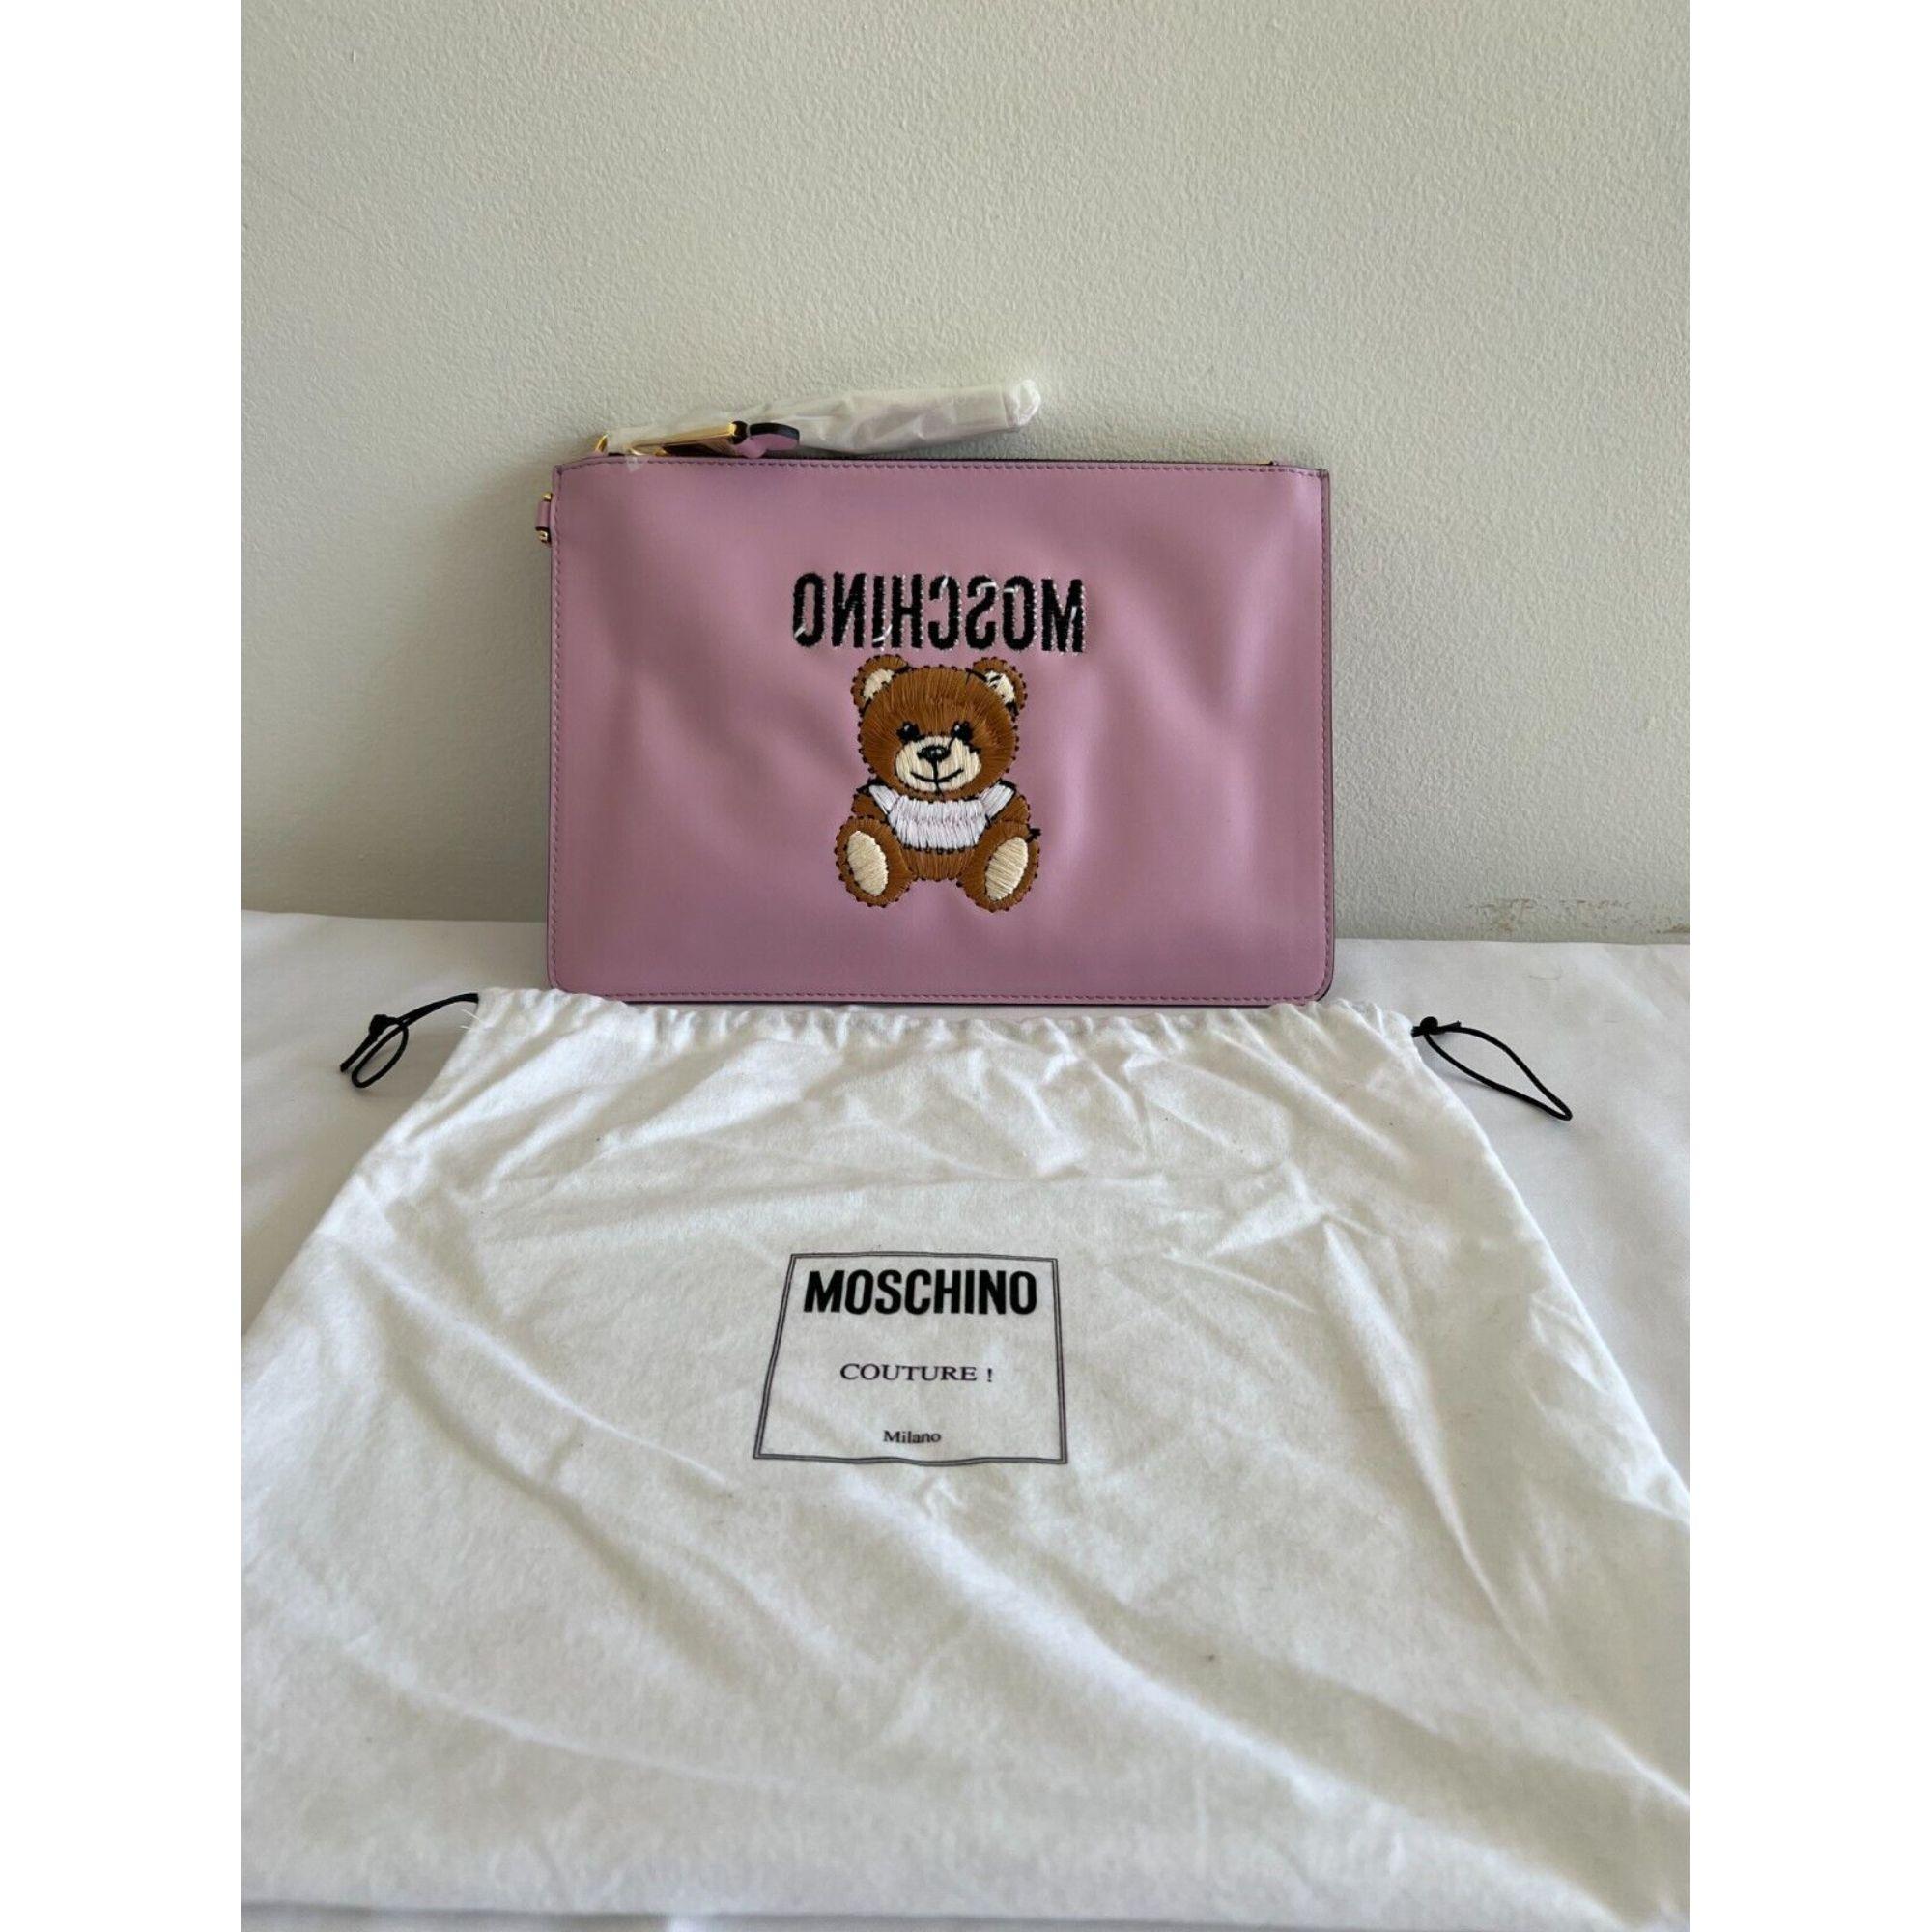 SS21 Moschino Couture Jeremy Scott Pink Clutch with Embroidered Teddy Bear

Additional Information:
Material: 100% VL
Color: Pink
Size: Medium
Style: Clutch
Dimensions: 7.75